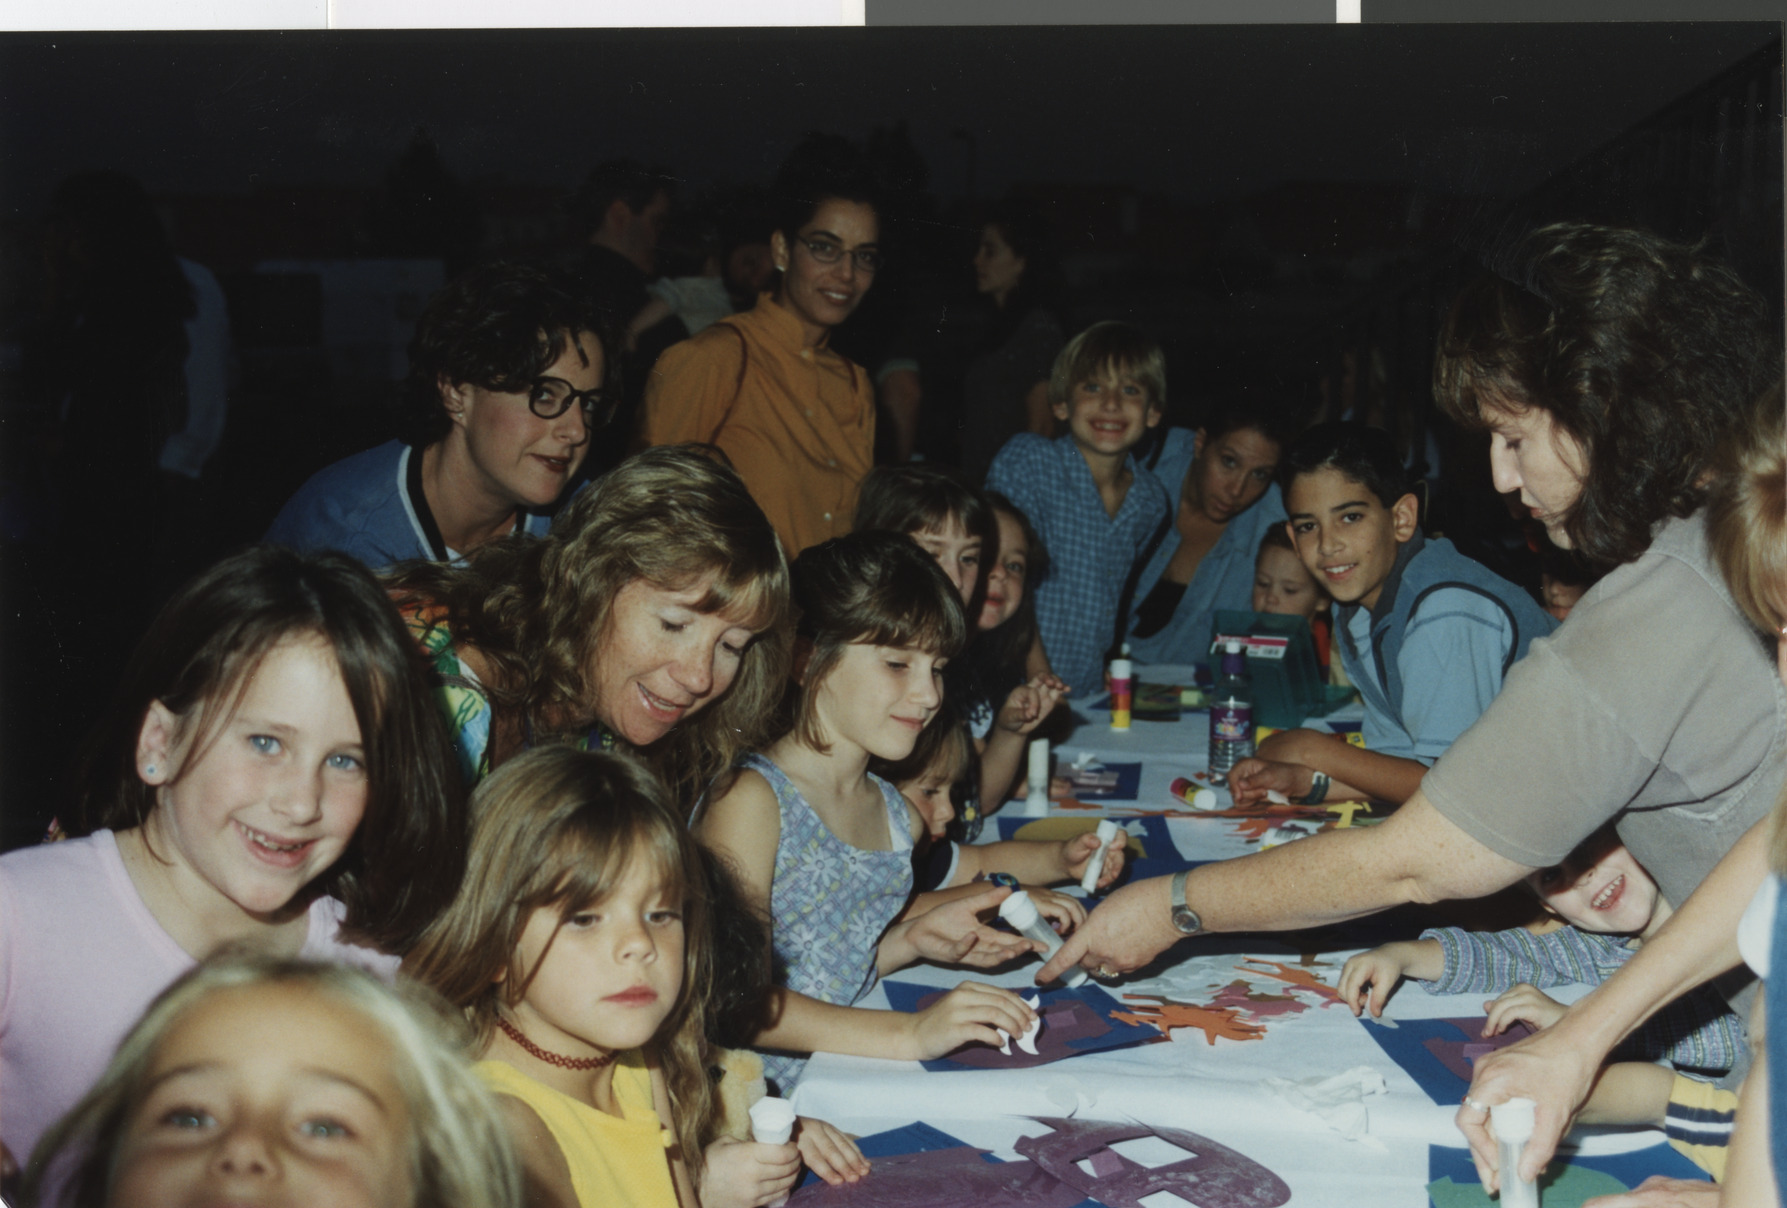 Photograph of children with arts and crafts, 1990s